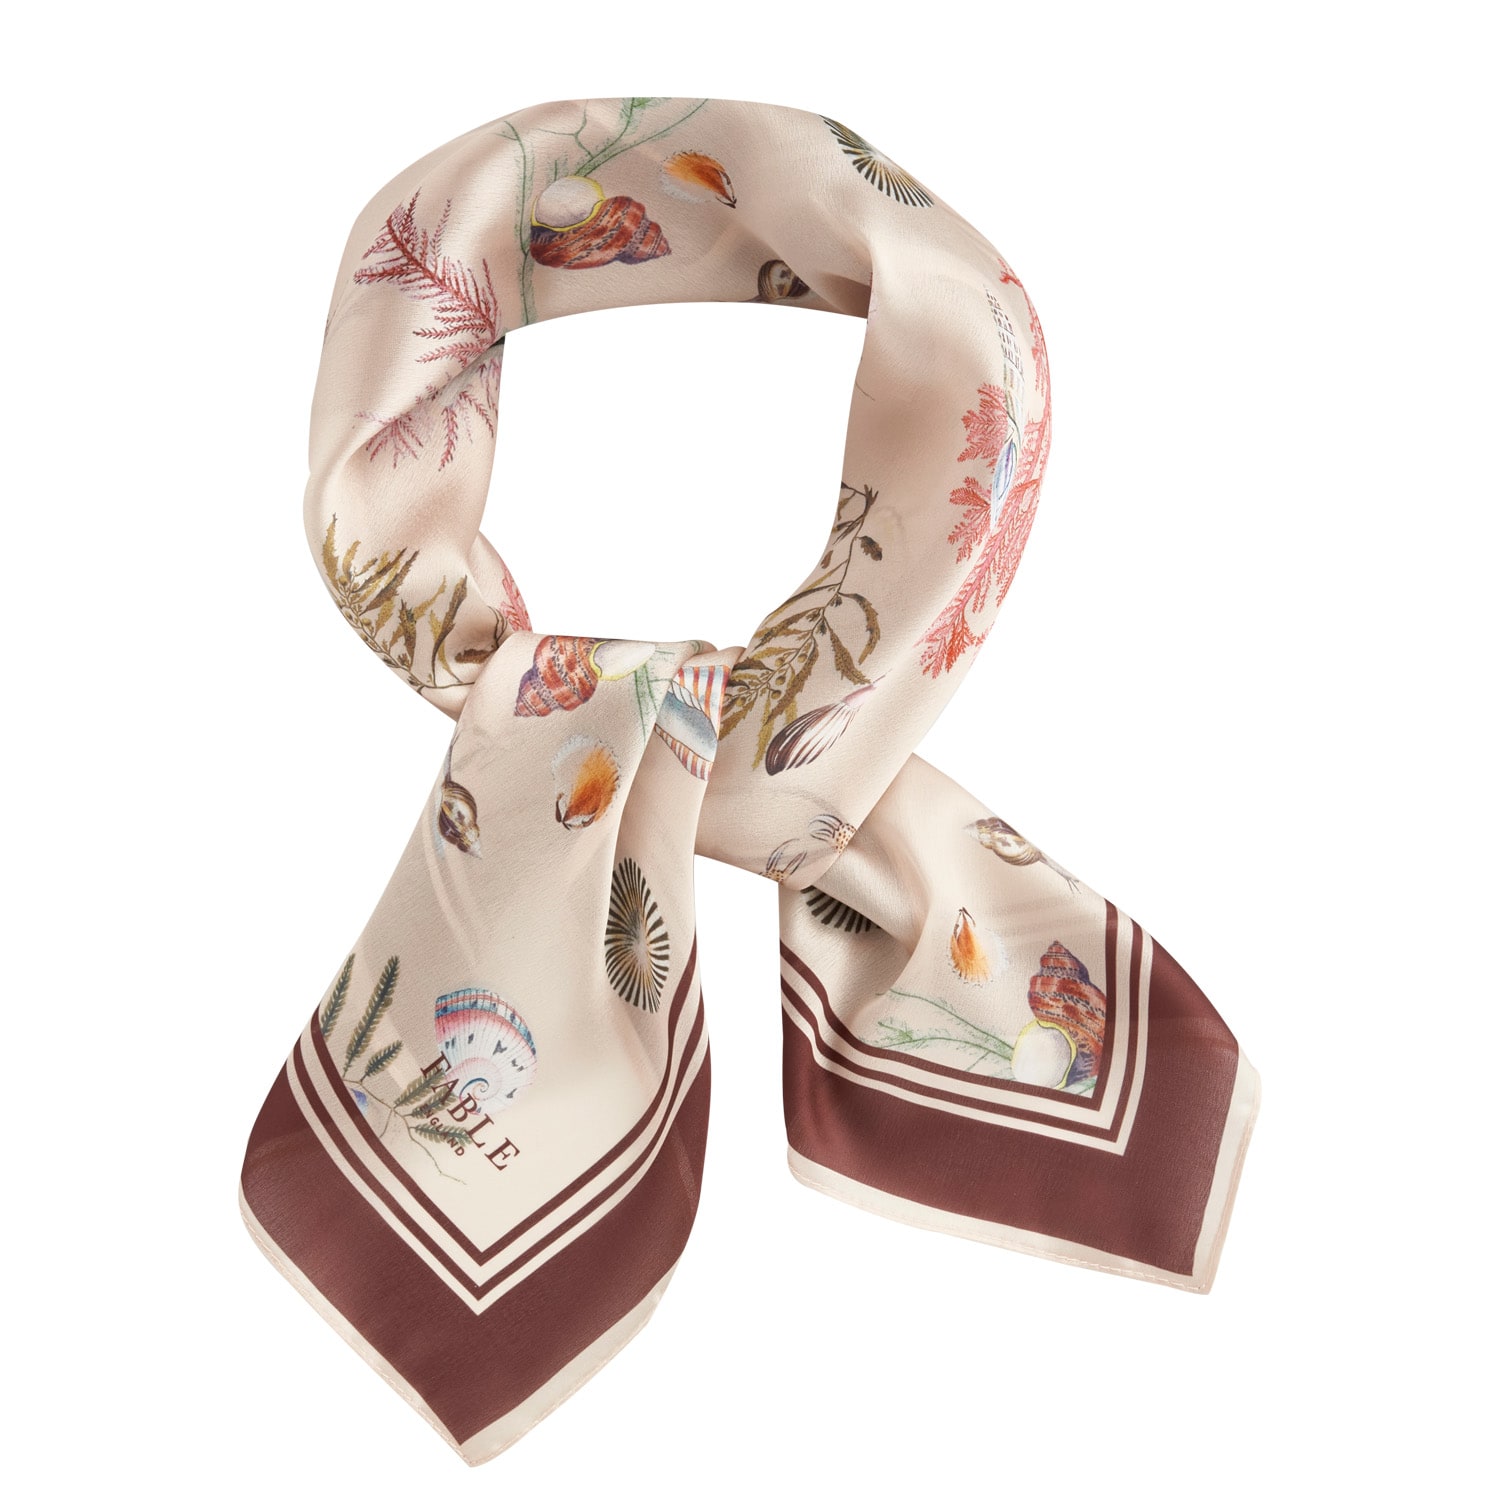 Women’s Neutrals Whispering Sands Square Scarf - Cream Fable England